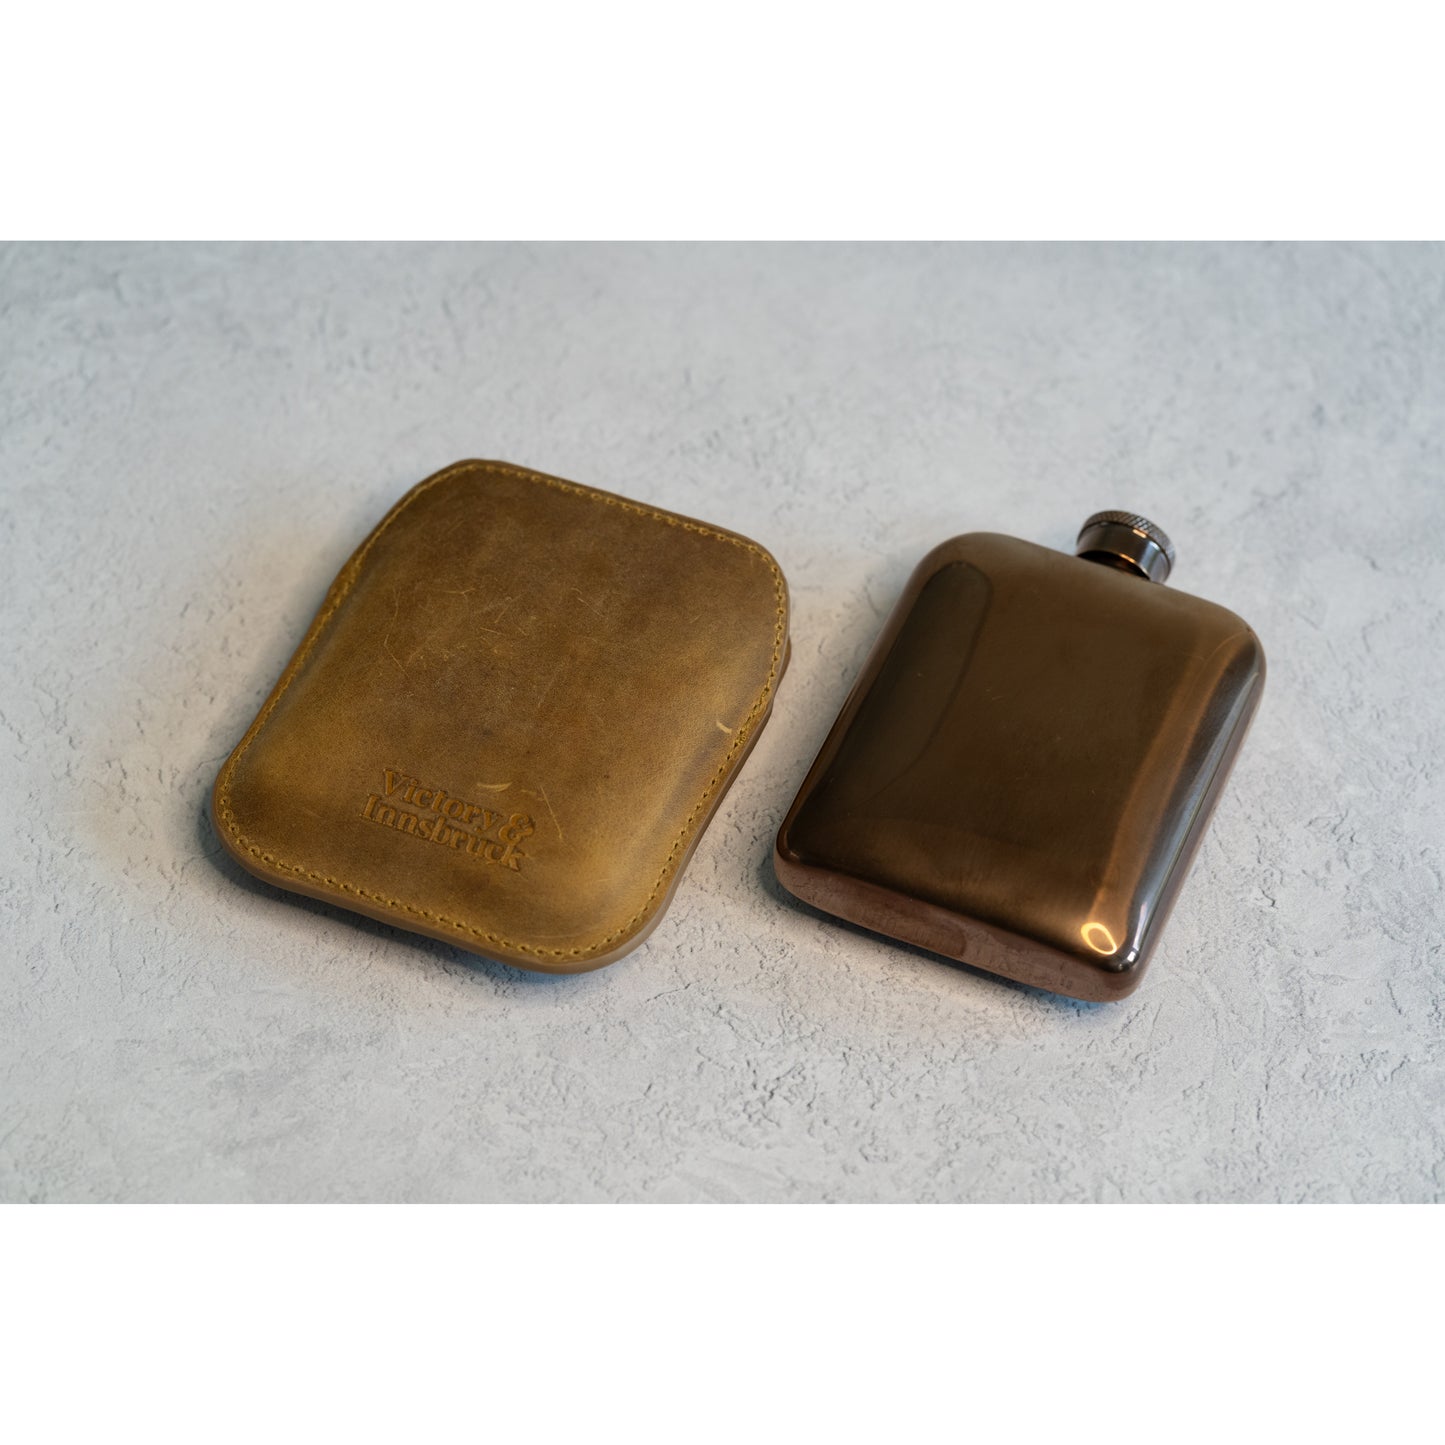 Full Grain Leather Cased Hip Flask | Full Tan Brown Leather | Copper Flask